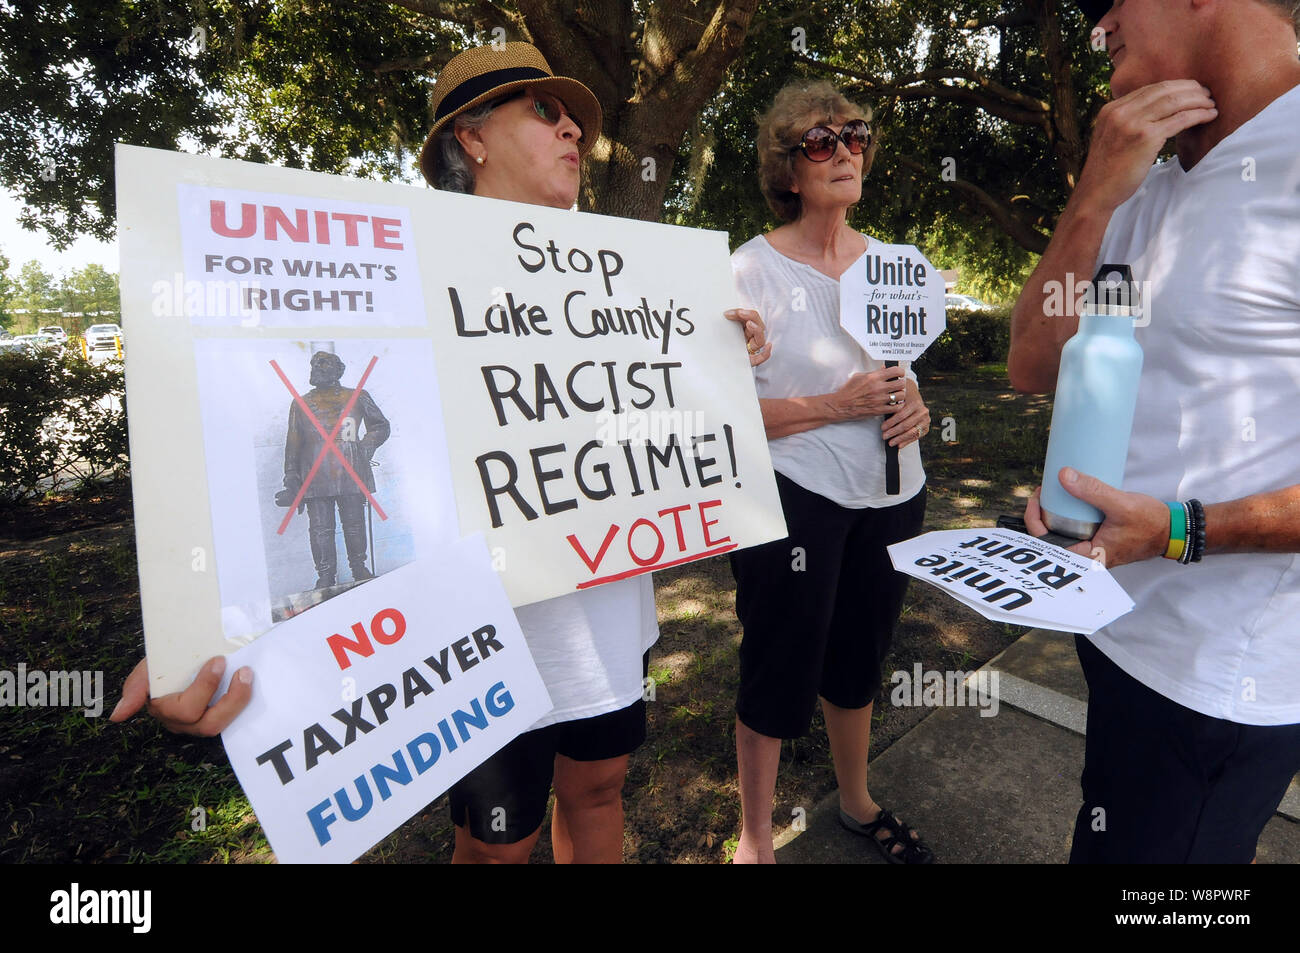 Tavares, United States. 10th Aug, 2019. August 10, 2019 - Tavares, Florida, United States - People protest in a Unite for What's Right march against the placement of a Confederate statue of Gen. Edmund Kirby Smith in the Lake County Historical Museum. Local leaders voted 3-2 to house the statue of the Confederate general which has been in the National Statuary Hall at the U.S. Capitol, and is being replaced next year with one of African American educator and civil rights advocate Mary McLeod Bethune. Credit: Paul Hennessy/Alamy Live News Stock Photo